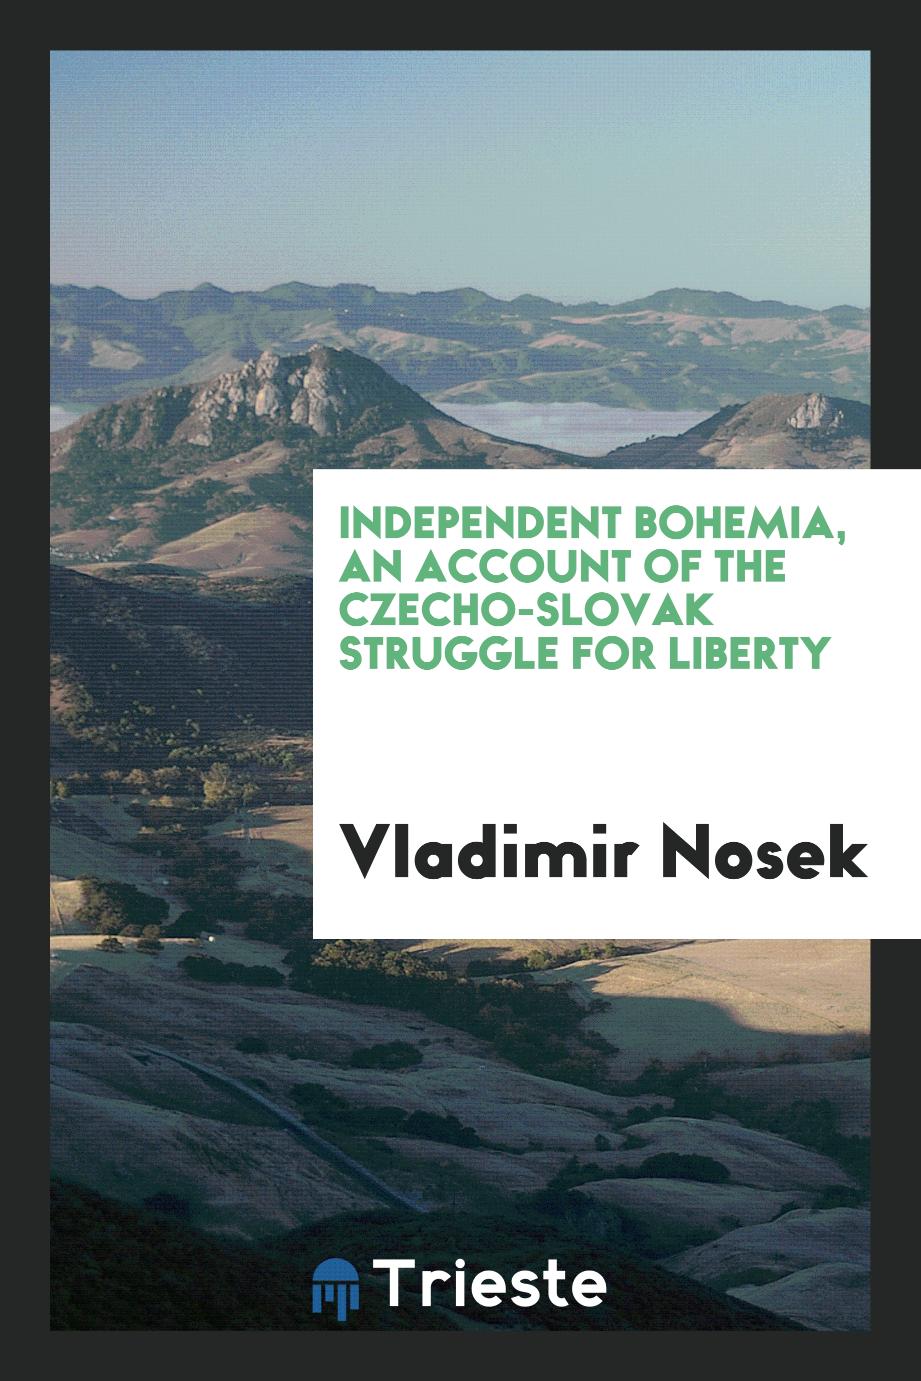 Independent Bohemia, an account of the Czecho-Slovak struggle for liberty